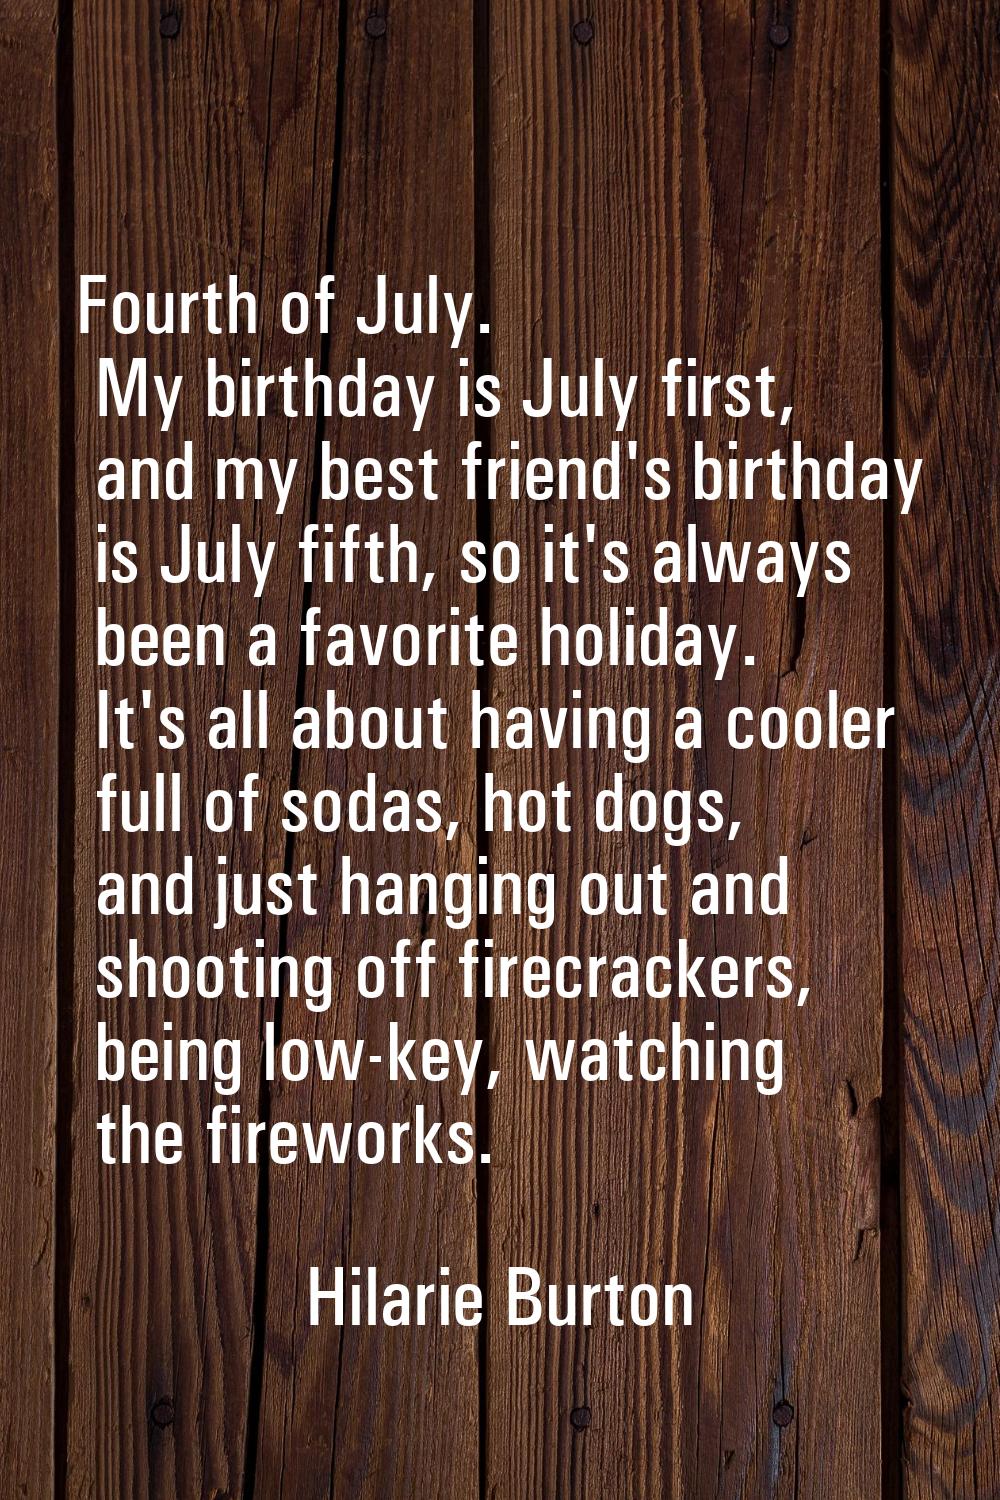 Fourth of July. My birthday is July first, and my best friend's birthday is July fifth, so it's alw